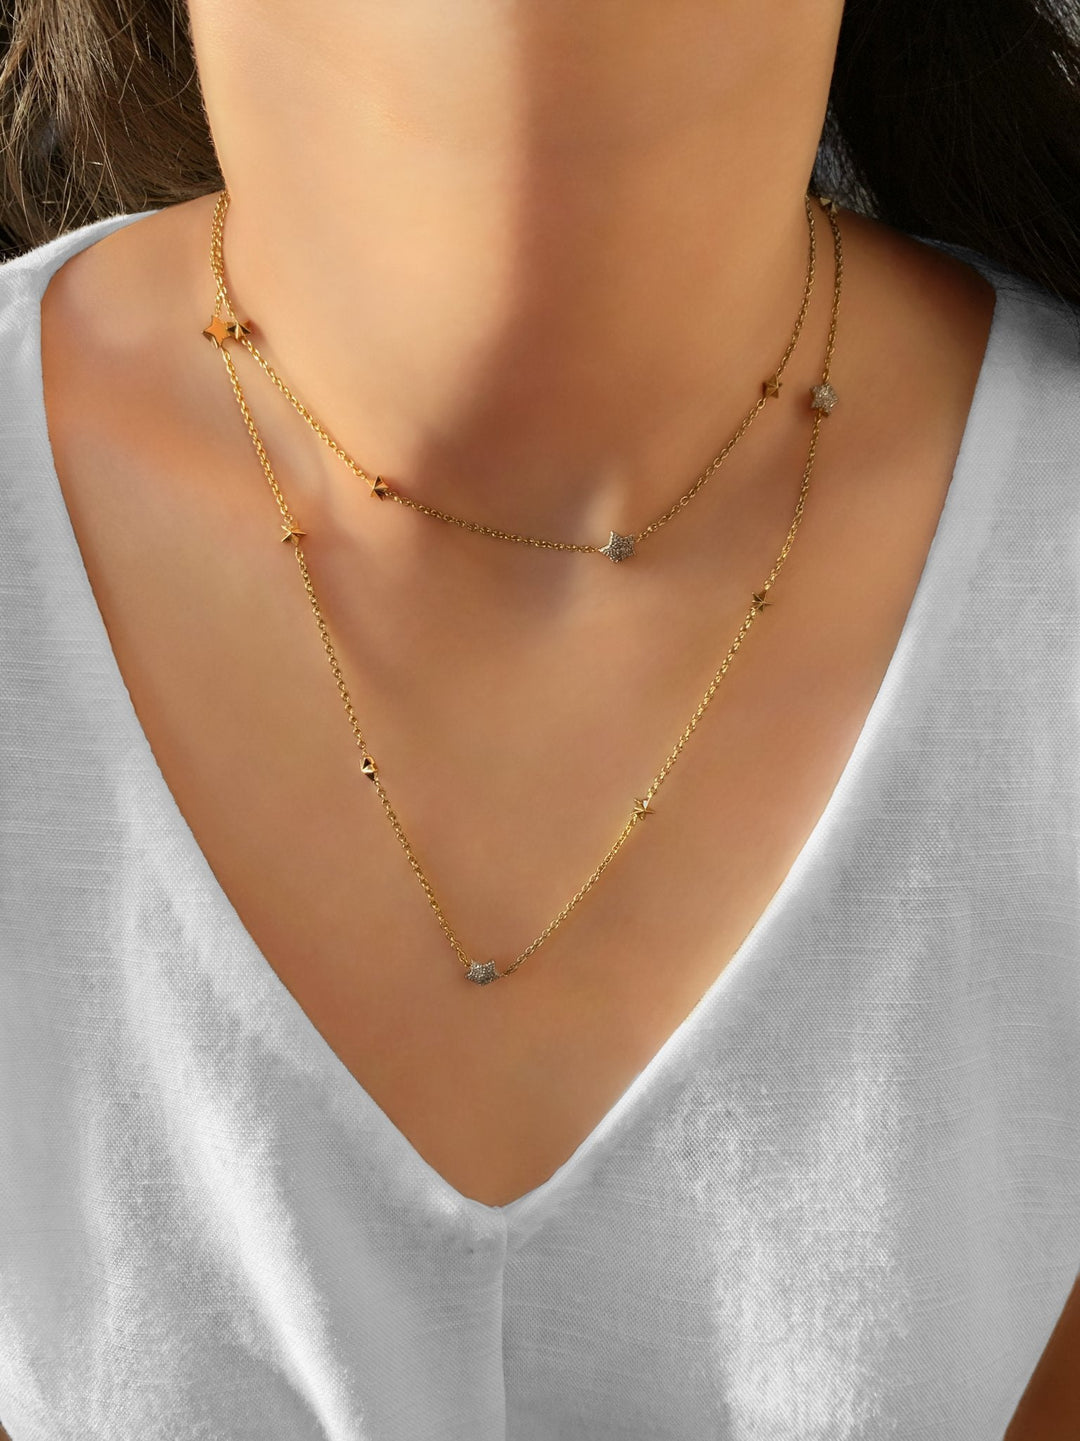 Lucky Star Layered Diamond Necklace in 14K Yellow Gold